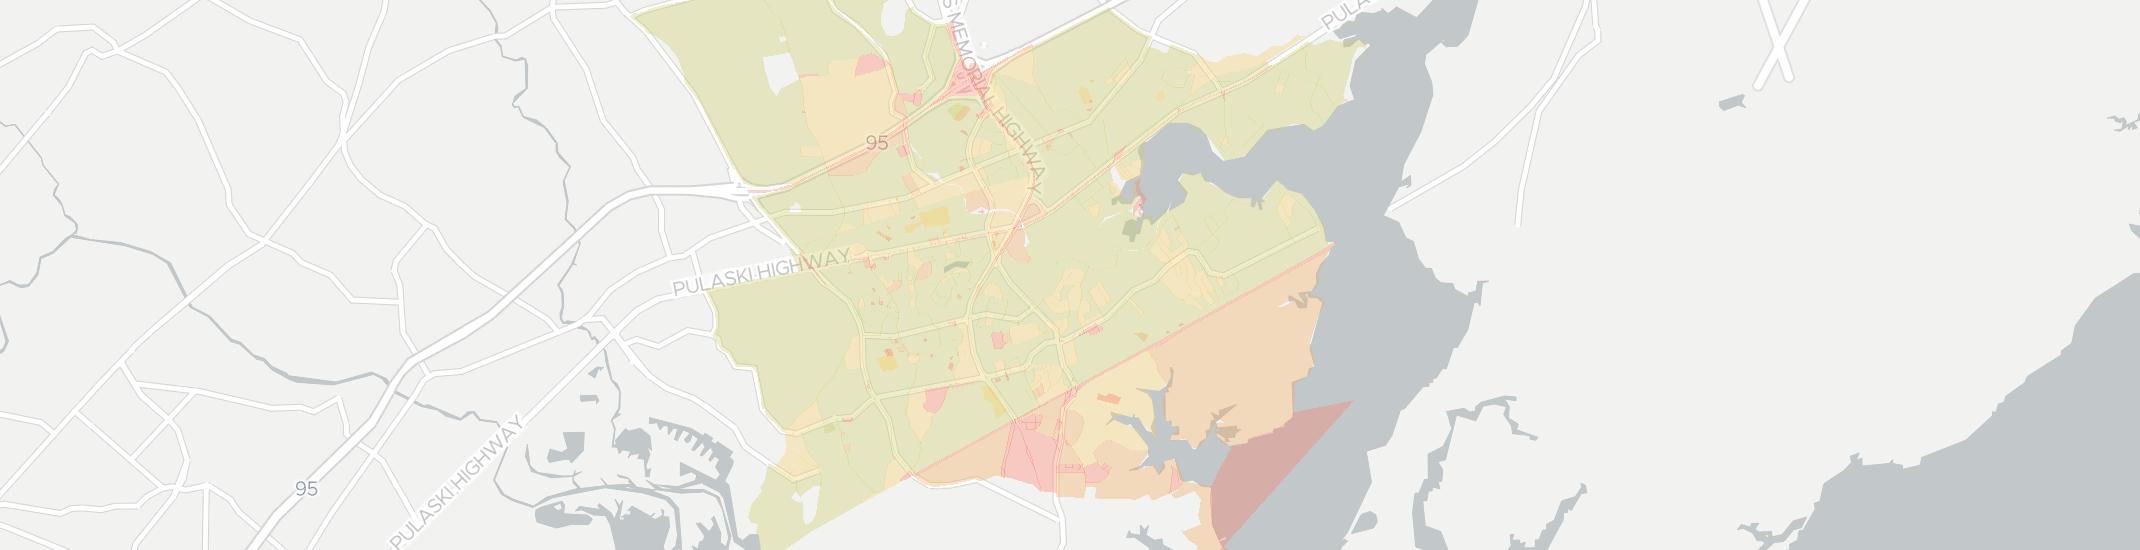 Edgewood Internet Competition Map. Click for interactive map.